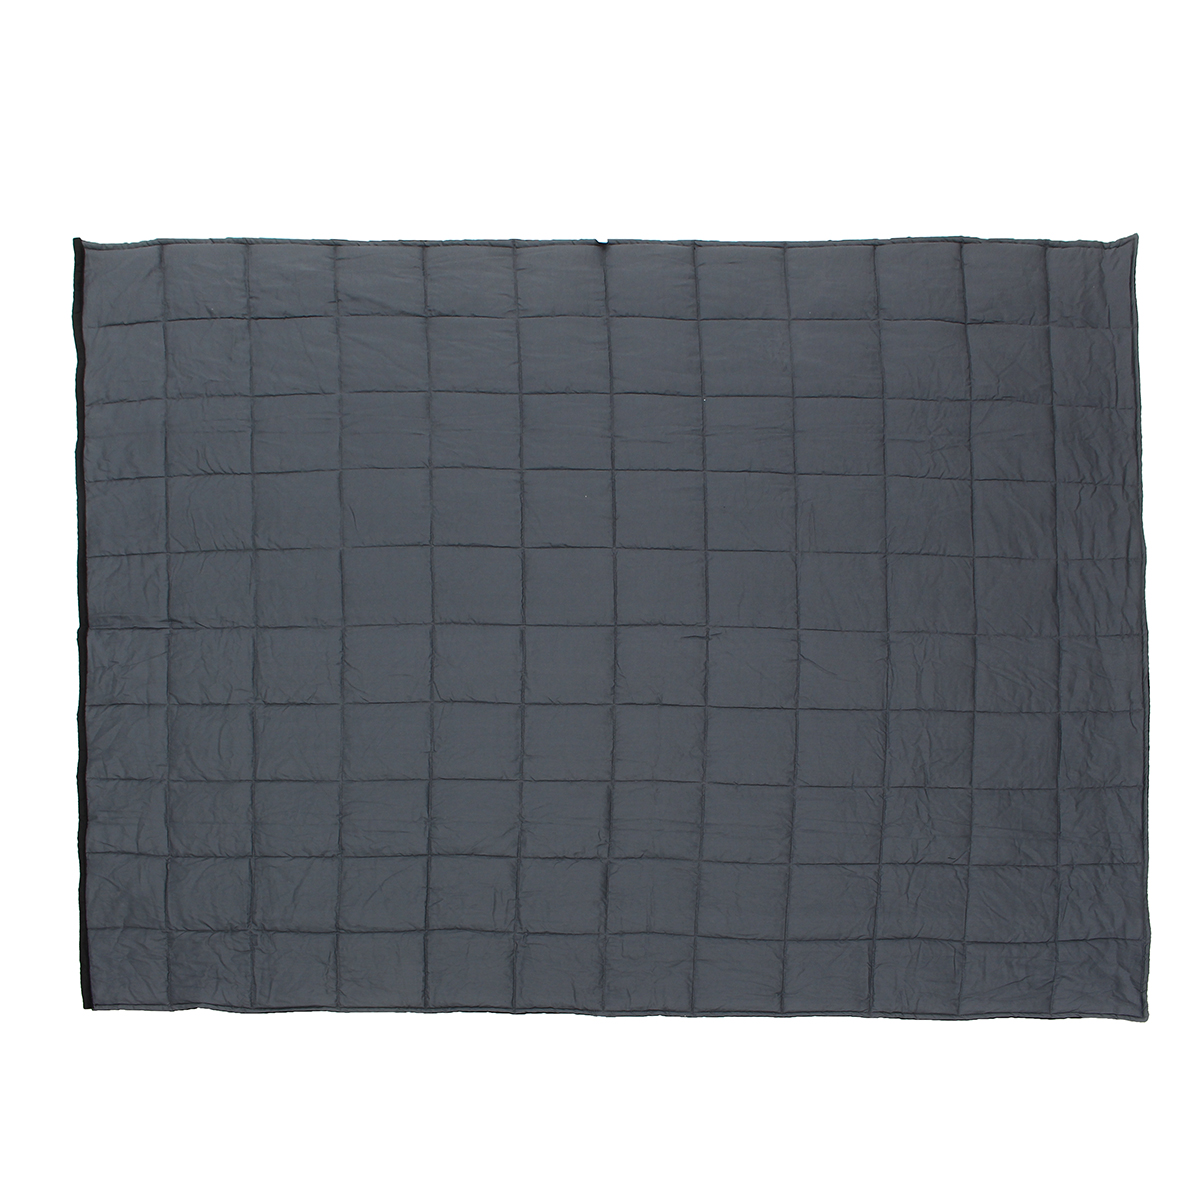 120x180CM-Black-Grey-Weighted-Blanket-Cotton-79115kg-Heavy-Sensory-Relax-Blankets-1349466-5